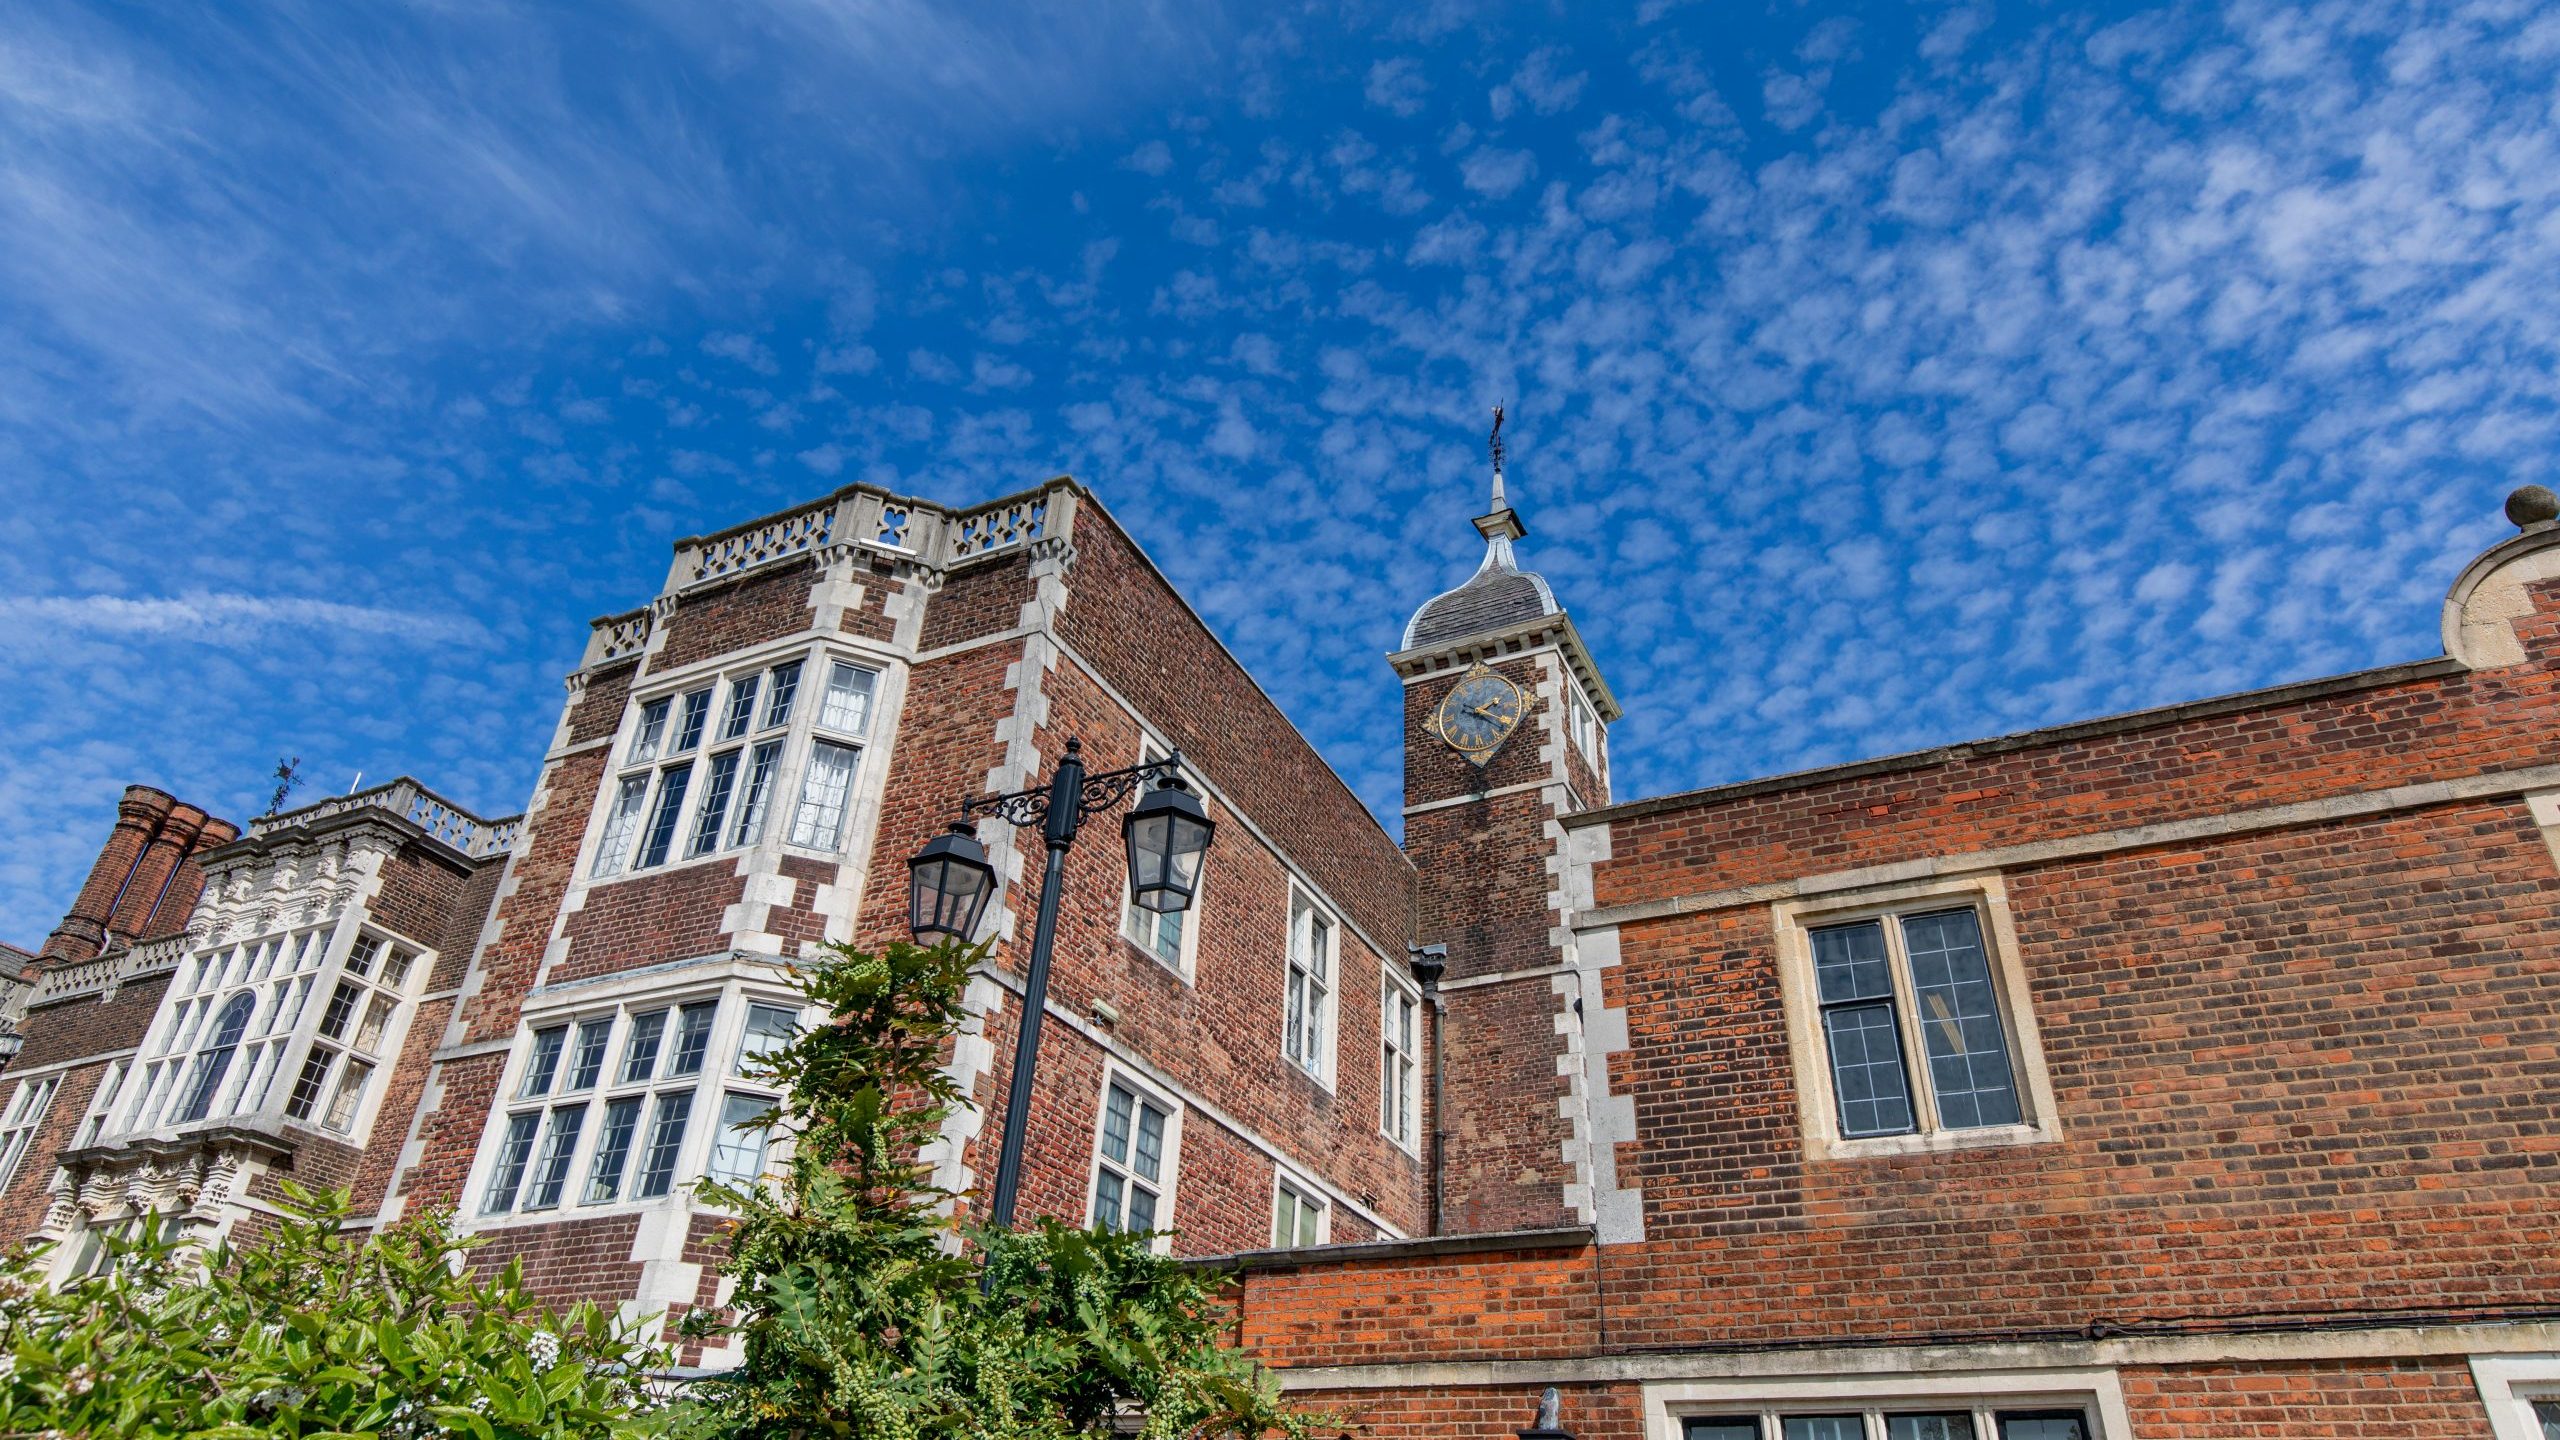 The Royal Greenwich Heritage Trust runs Charlton House in Greenwich